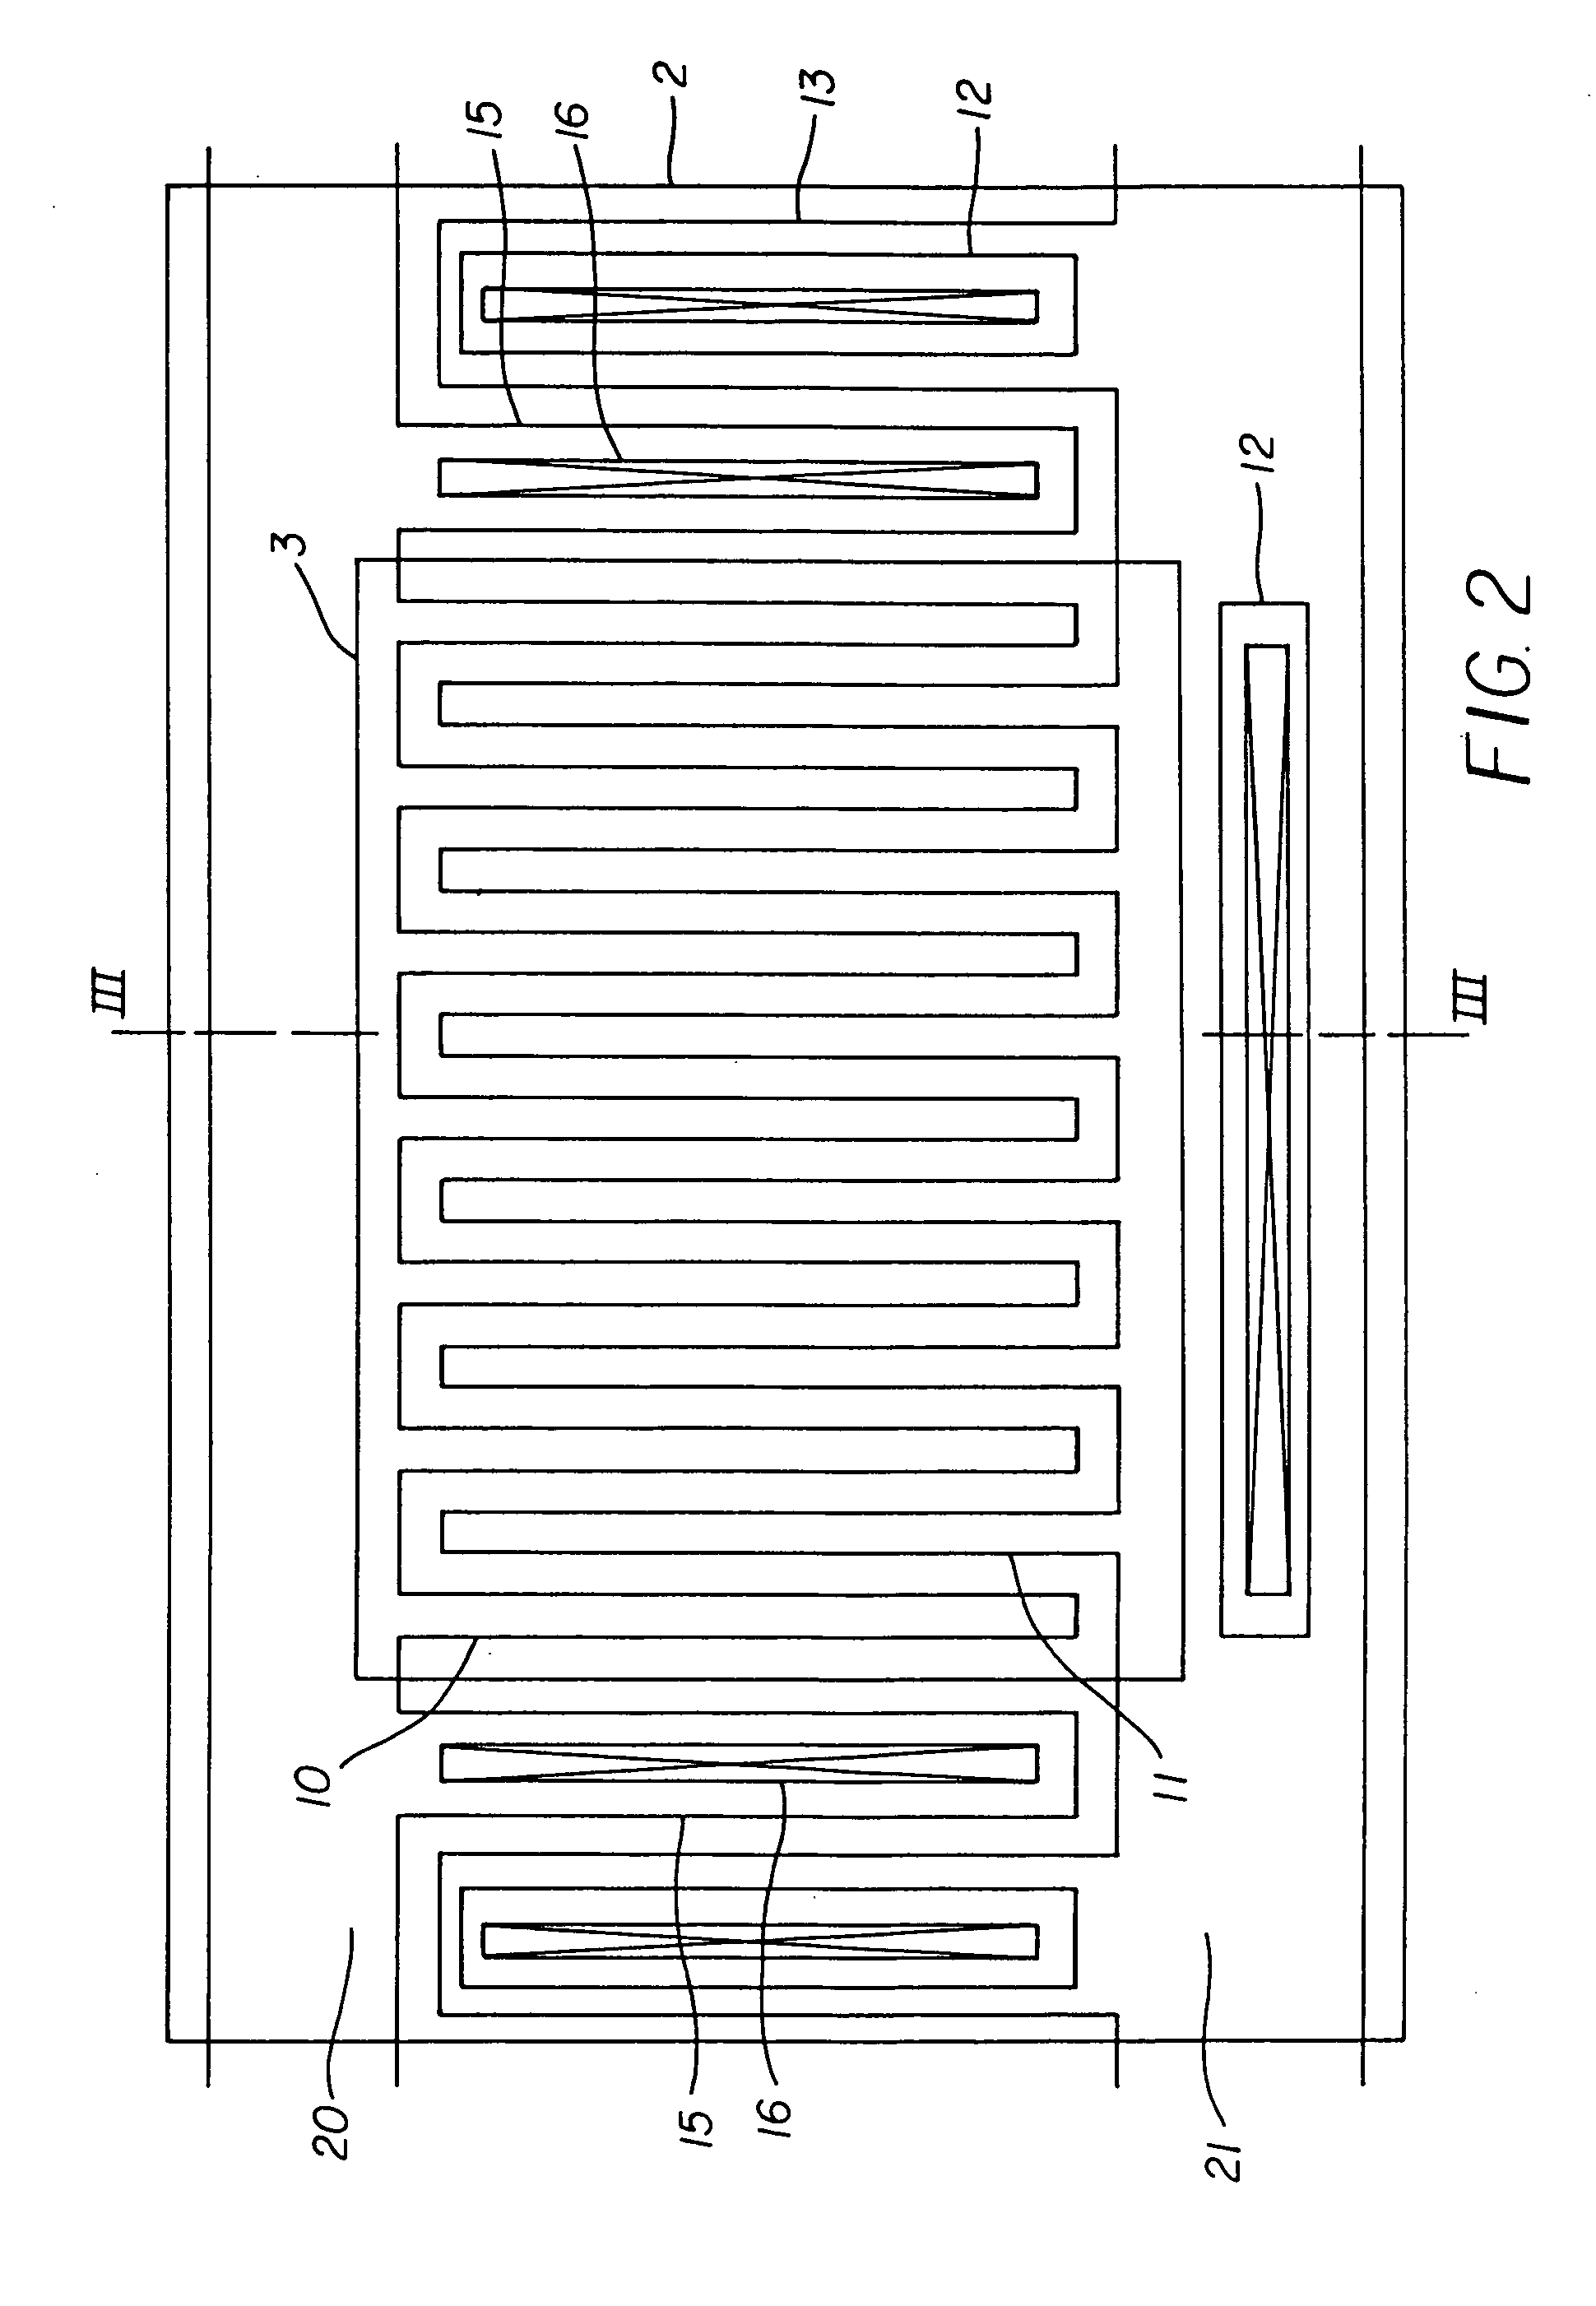 High power semiconductor device having a schottky barrier diode